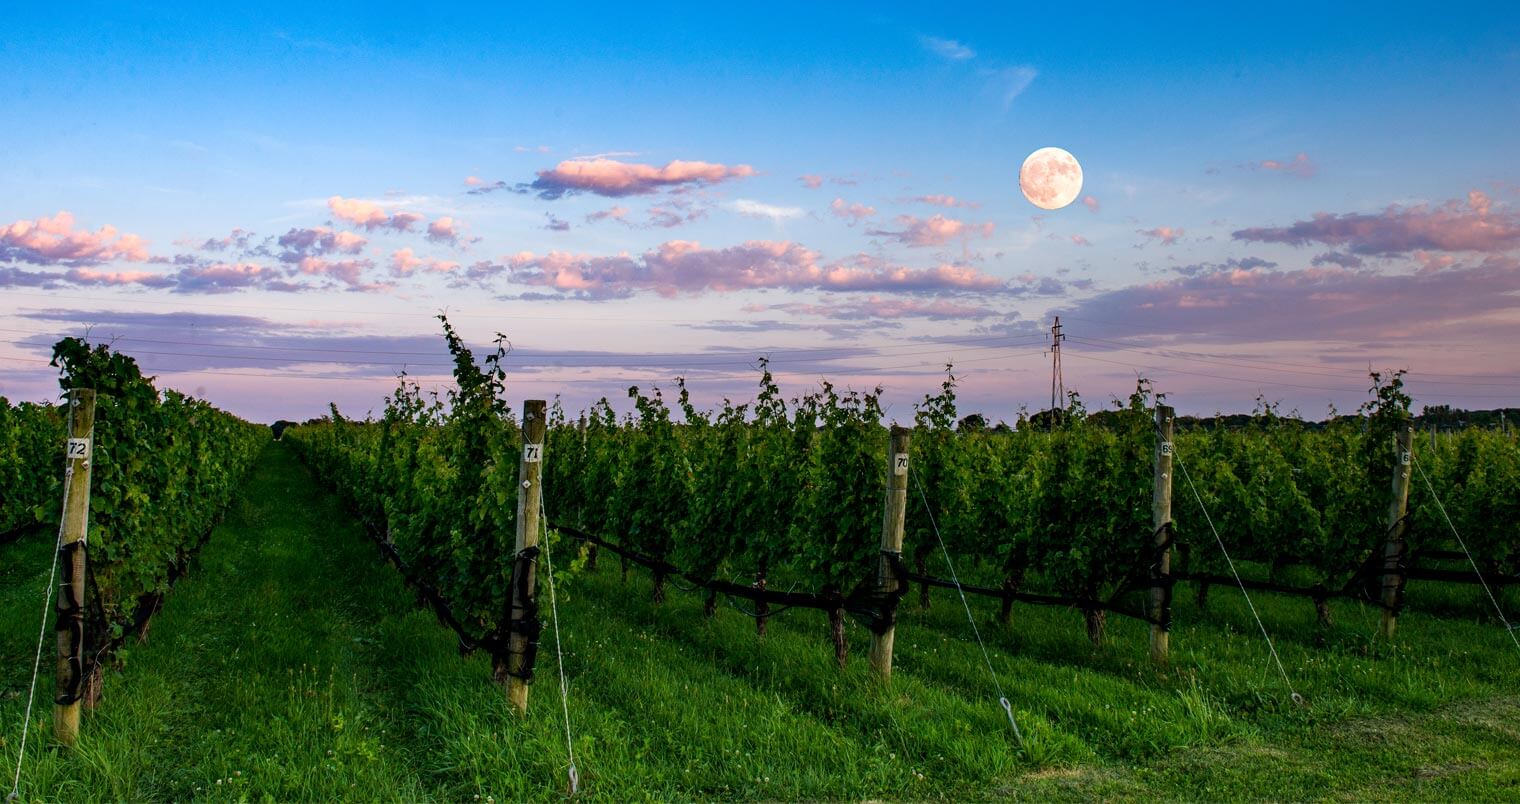 Shinn Estate Vineyard at dusk with moon, featured image